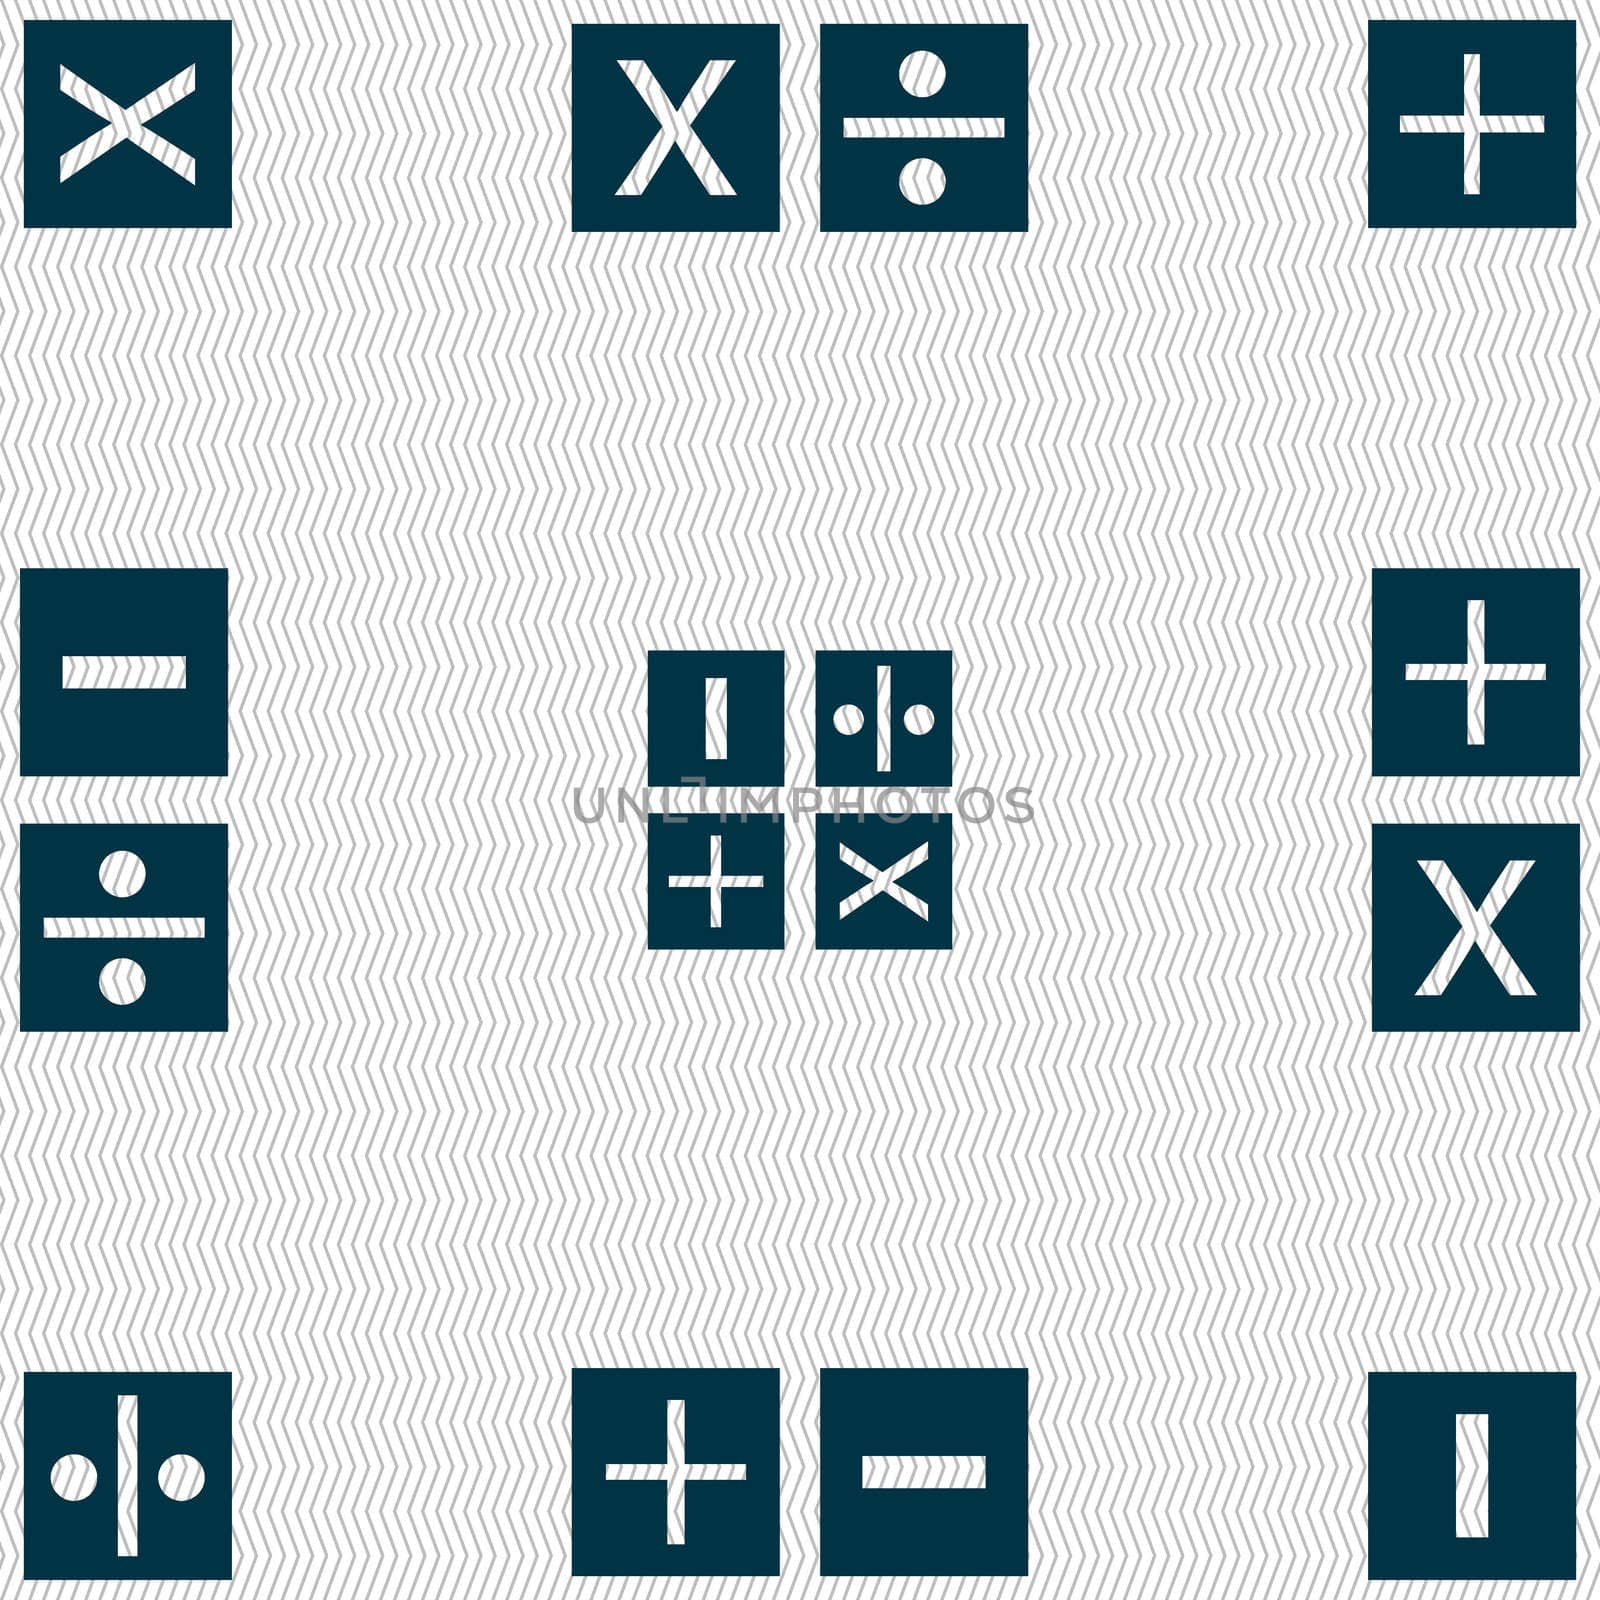 Multiplication, division, plus, minus icon Math symbol Mathematics. Seamless abstract background with geometric shapes. illustration